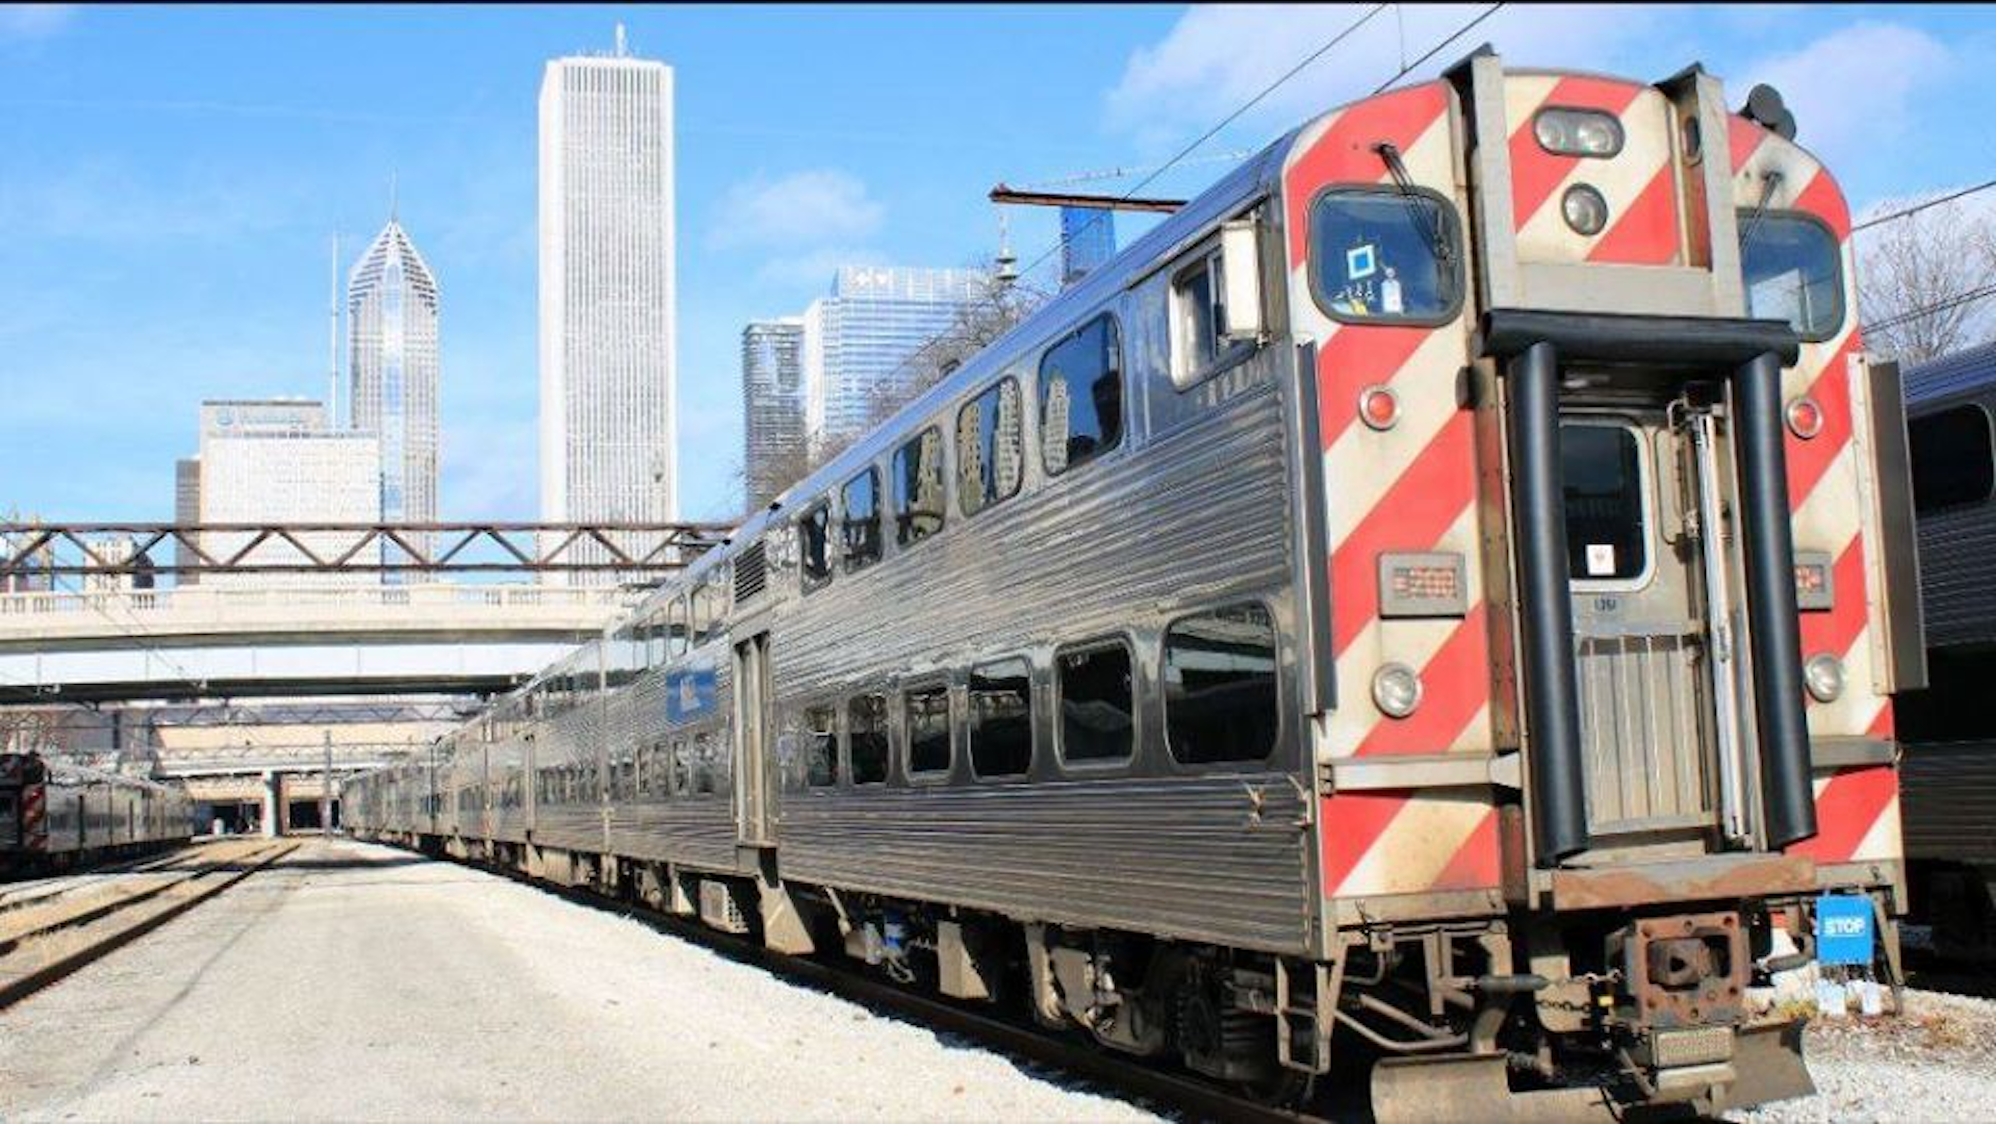 Cook County targets January 2021 launch for Fair Transit South Cook